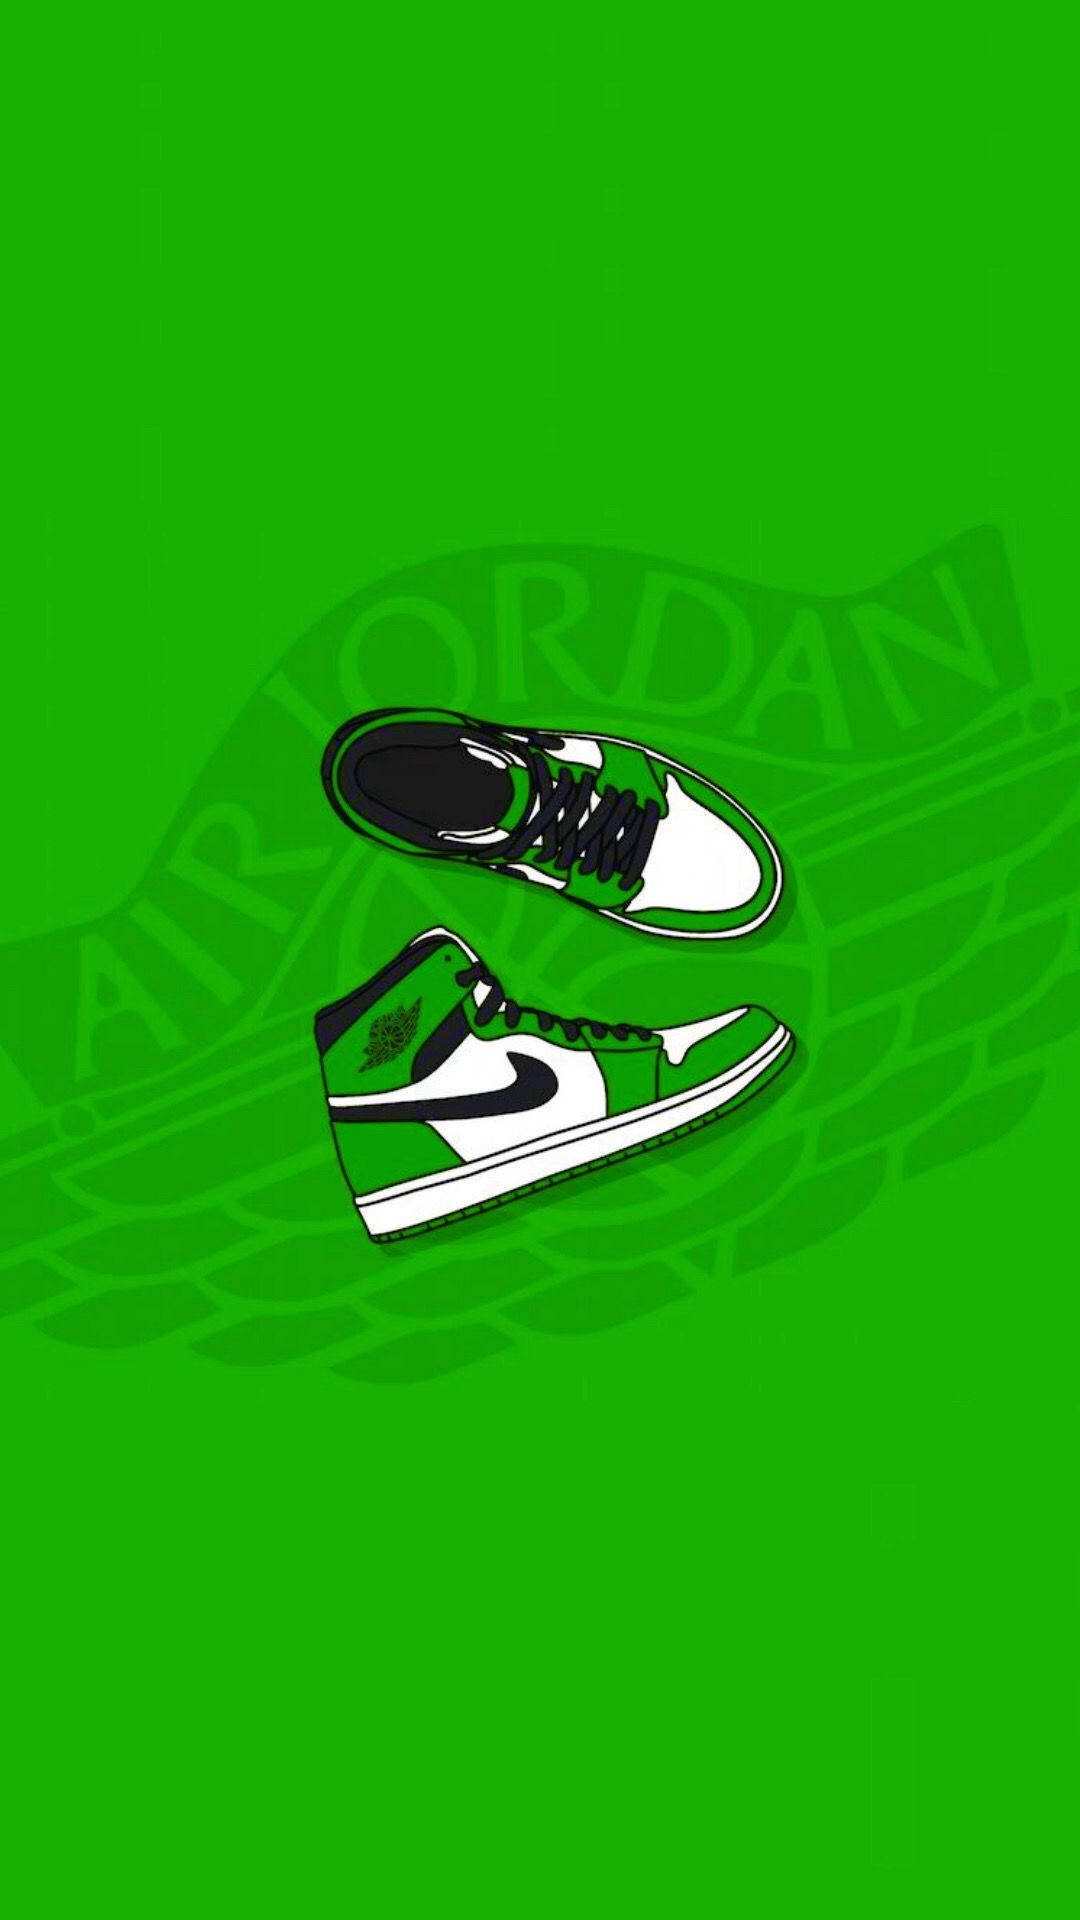 Download A Green Background With A Pair Of Sneakers On It Wallpaper ...